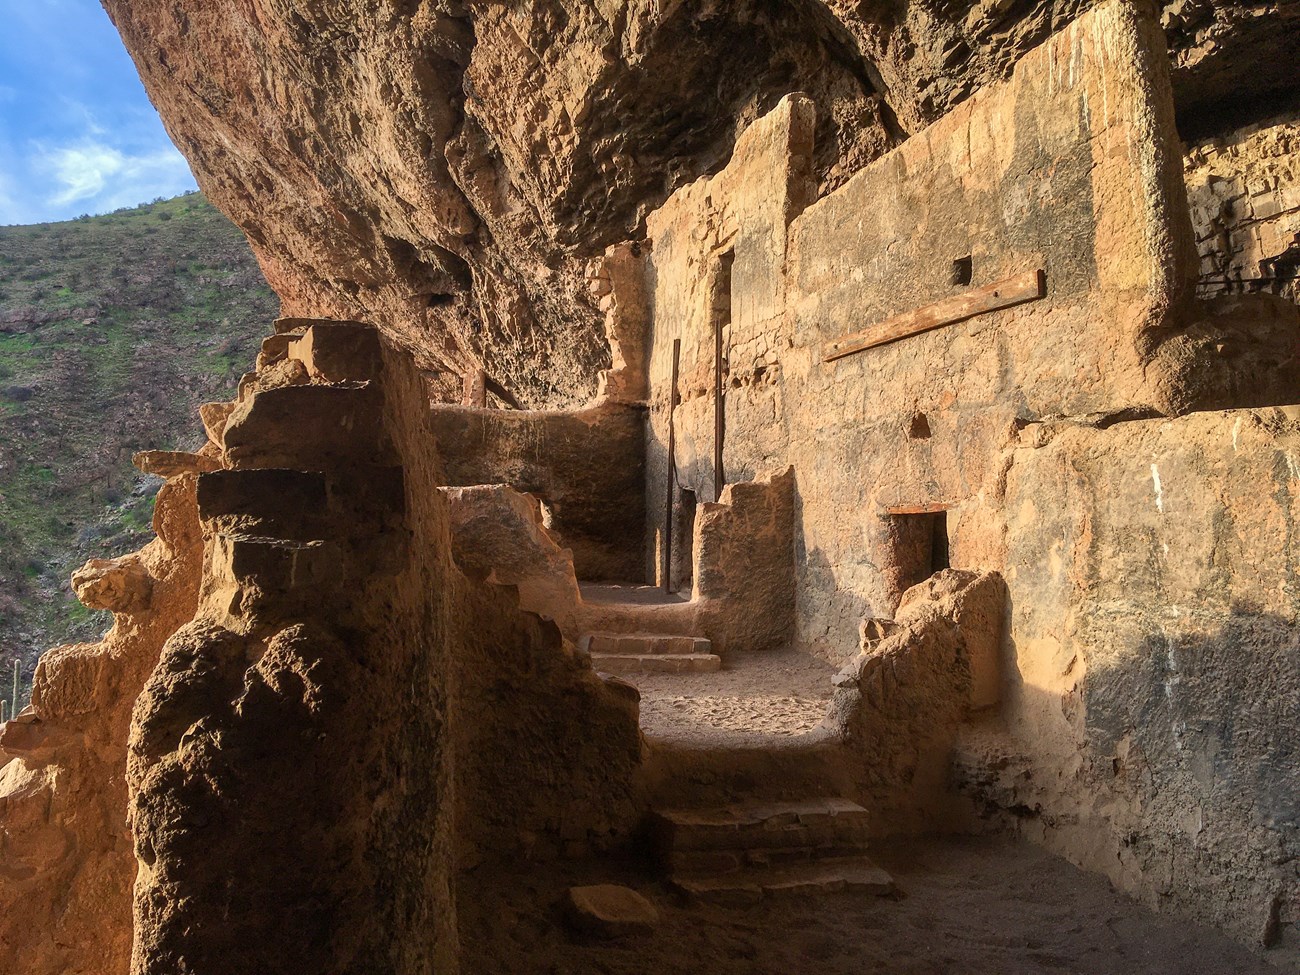 The historic walls and cave opening of the lower cliff dwellings at Tonto National Monument.